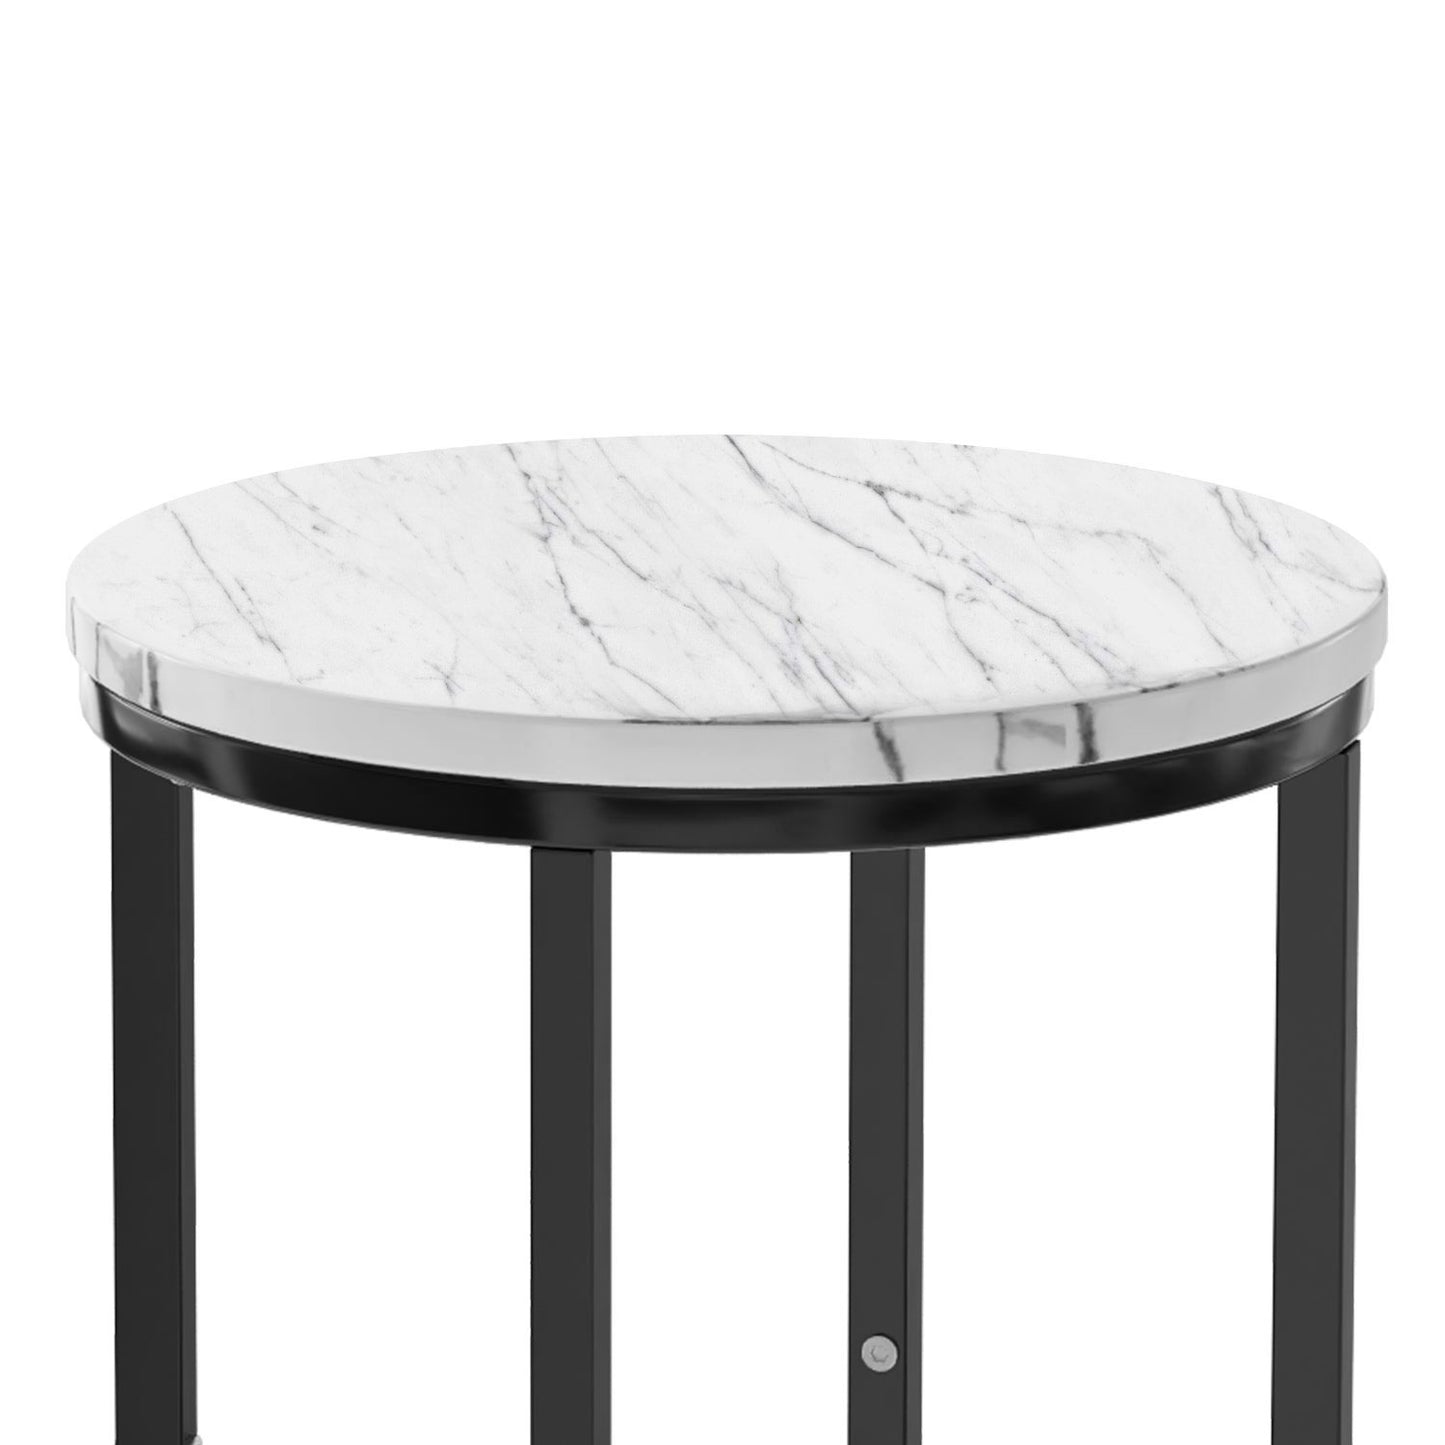 Round Side Table, Round Accent End Table with Sturdy X-Shaped Metal Frame Round Nightstand, for Living Room, Bedroom, Balcony, Office